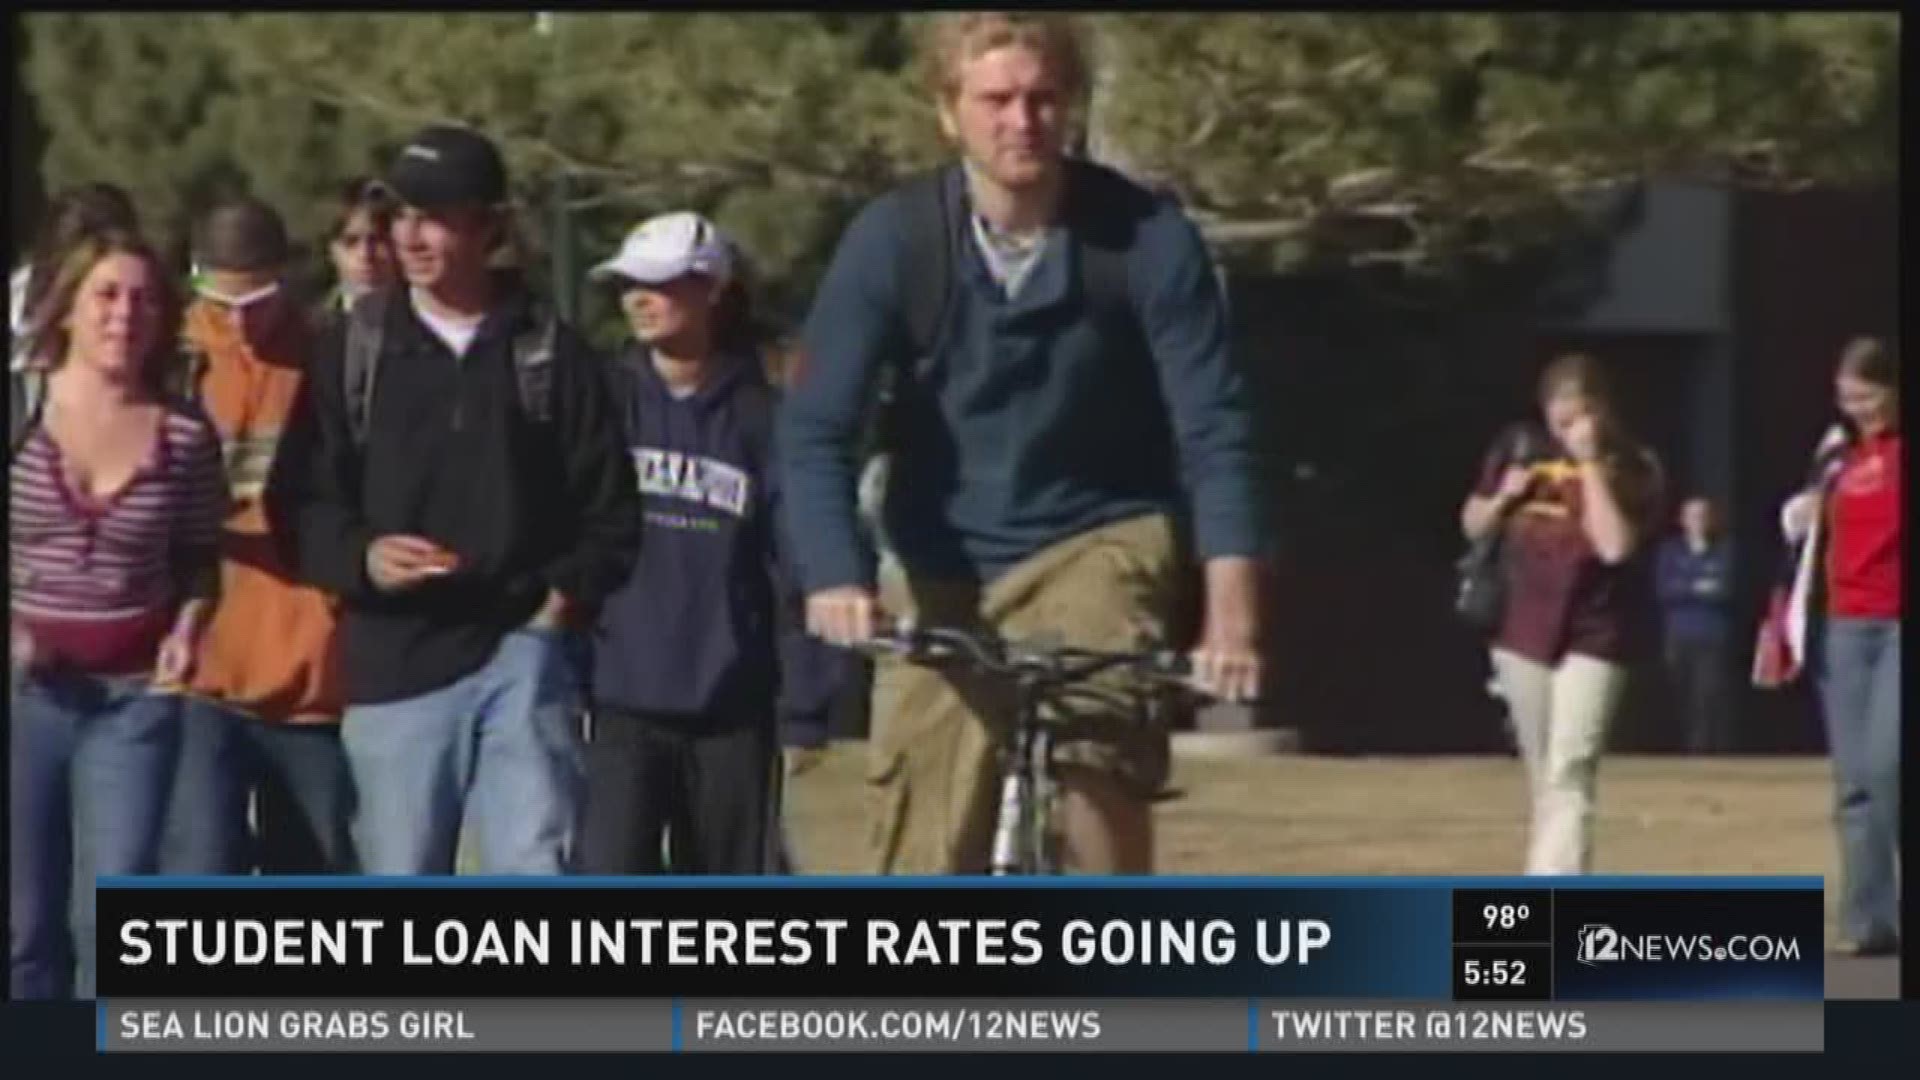 Student loan interest rates going up